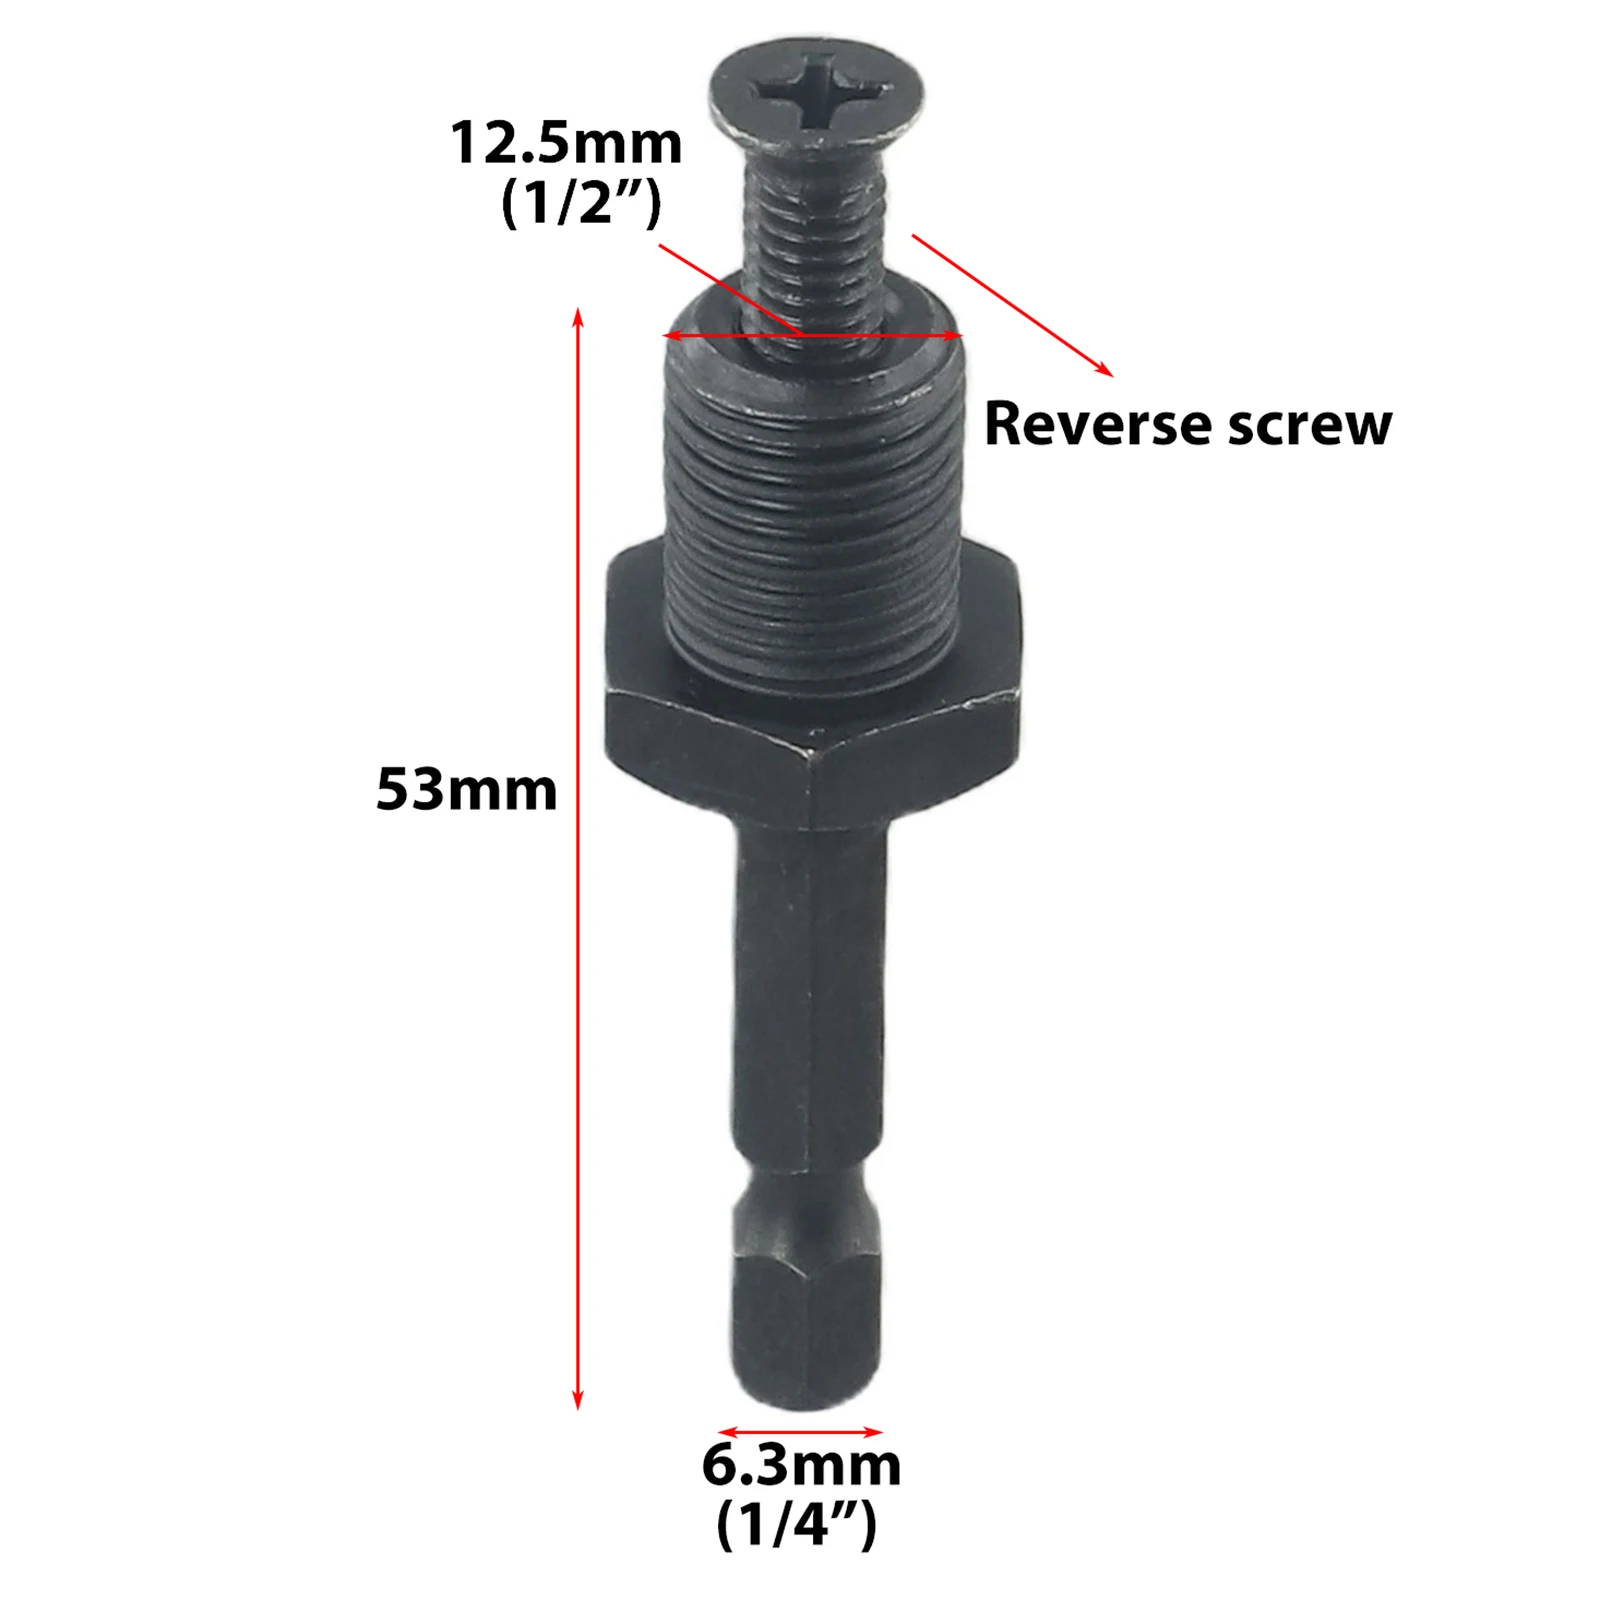 Drill Chuck Adapter 1/4 Hex Shank Adapter To 1/2 3/8 Male Thread W Reverse Screw For Drill Chuck Drilling Power Tool Accessories кольцо 62mm betwix reverse macro adapter for nikon